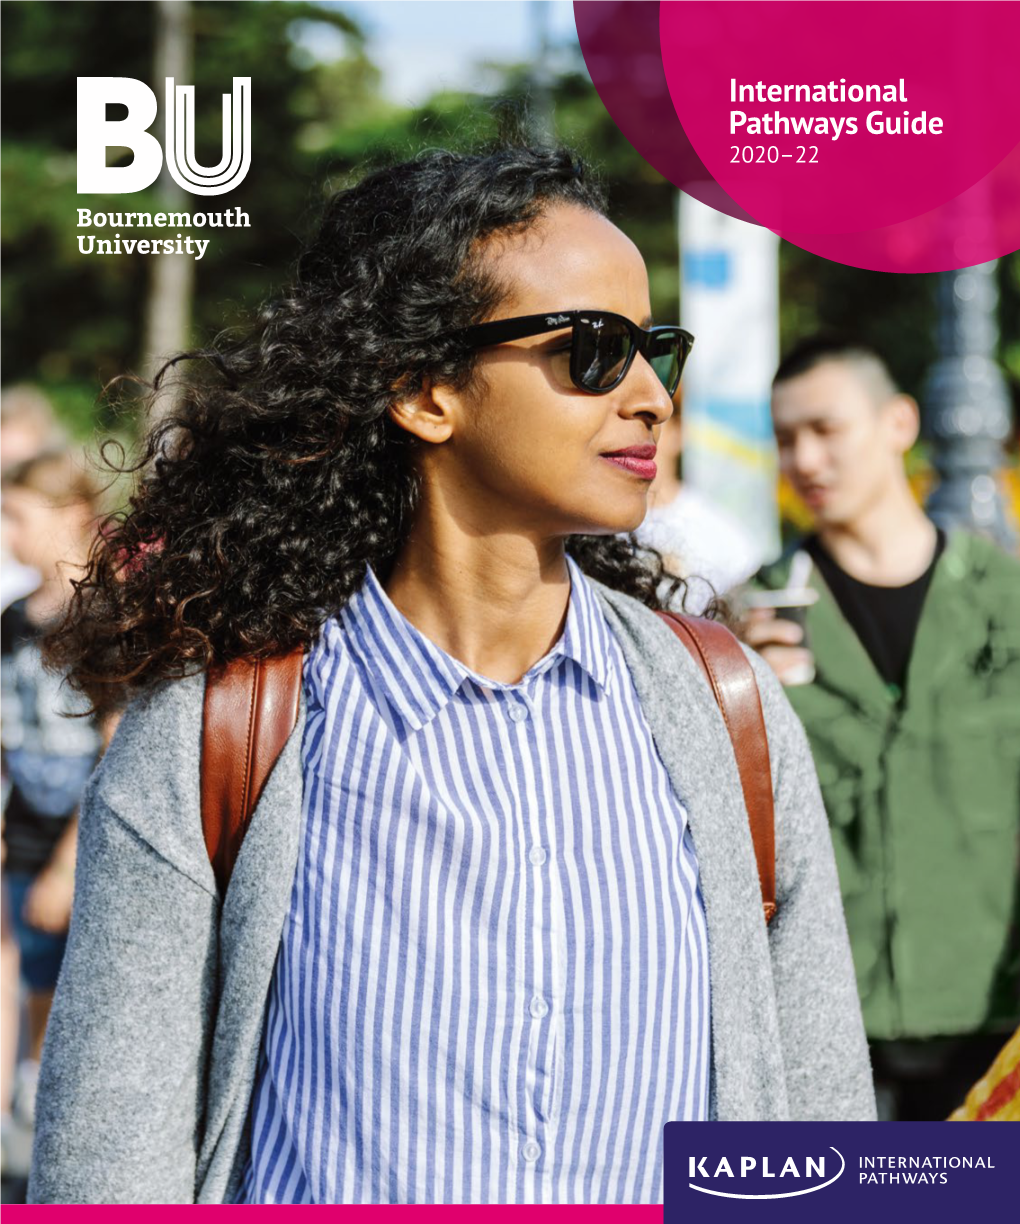 Bournemouth University (BU), a Superb, Careers-Focused Institution with Fantastic Teaching